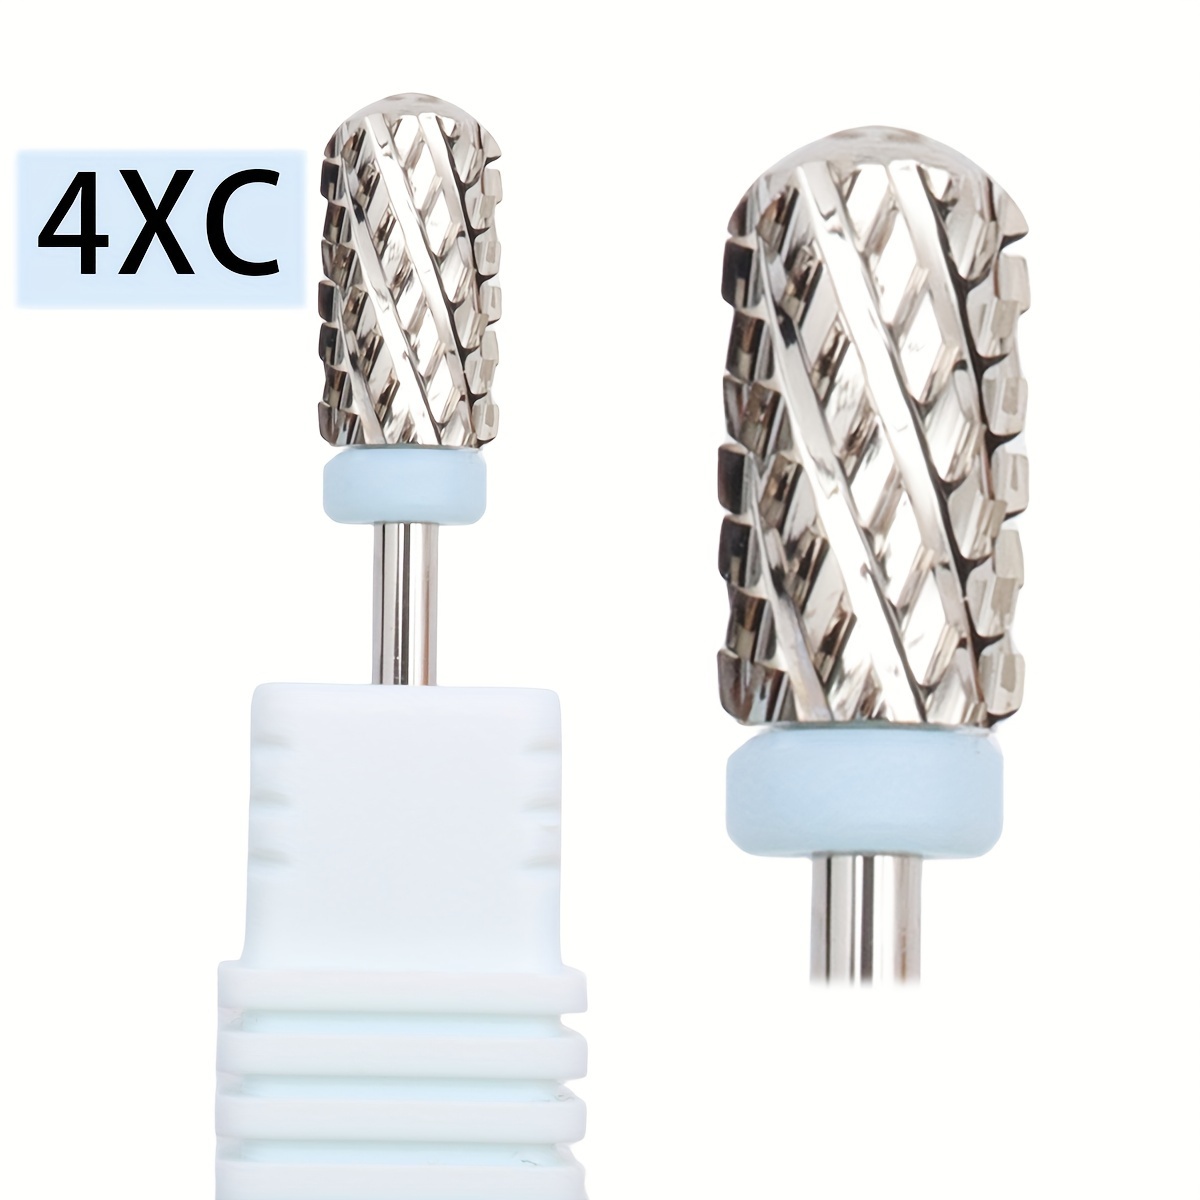 

4xc Round Tungsten Carbide Nail Drill Bit For Electric Manicure Machines - 5 In 1 Left & Right Hand Use - Cuticle Clean Bur